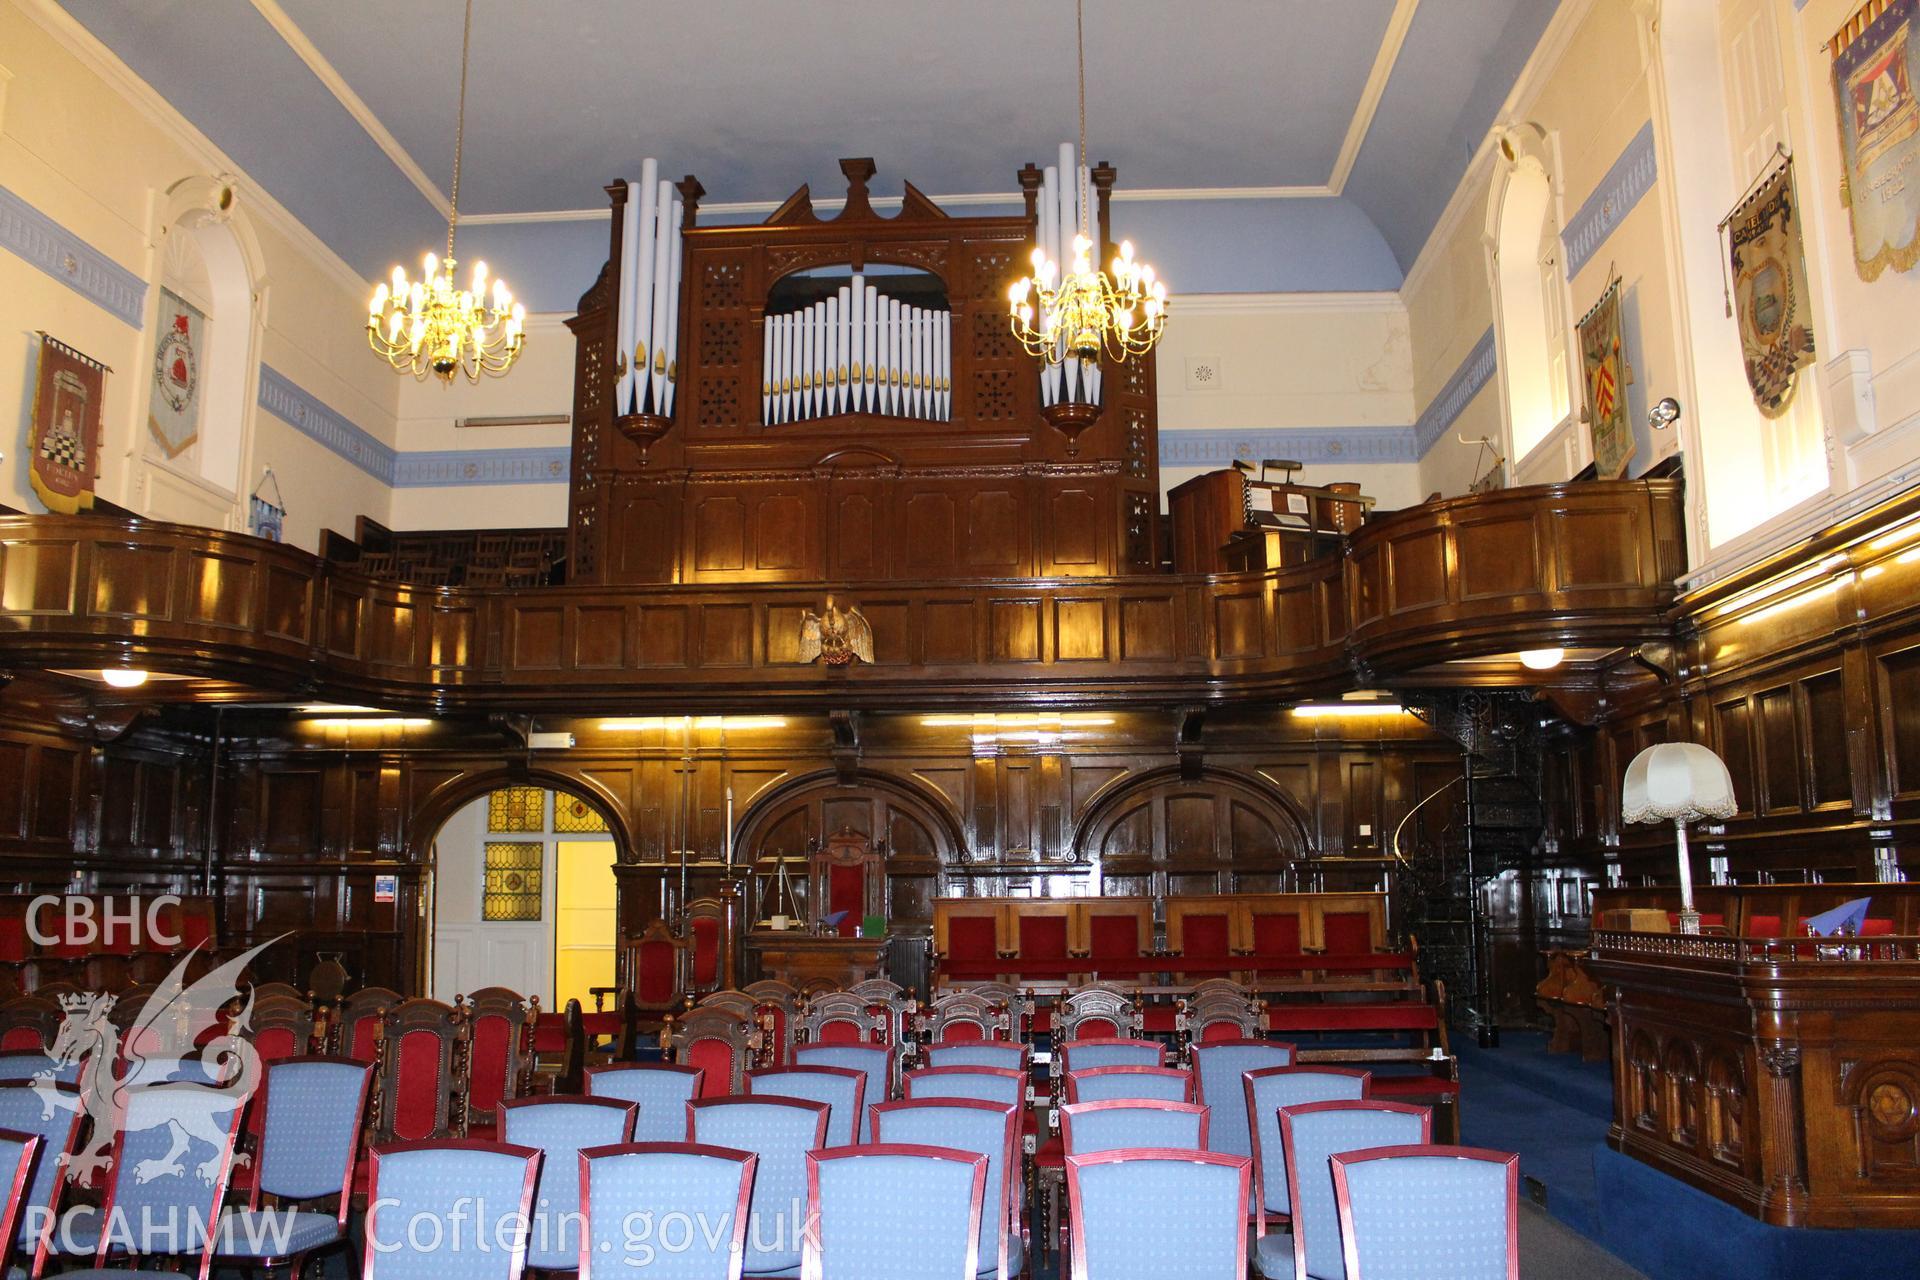 Interior view looking towards organ at former United Free Methodist Church, now a Masonic Temple, in Cardiff. Photograph taken during survey conducted by Sue Fielding of the RCAHMW, 11th March 2019.